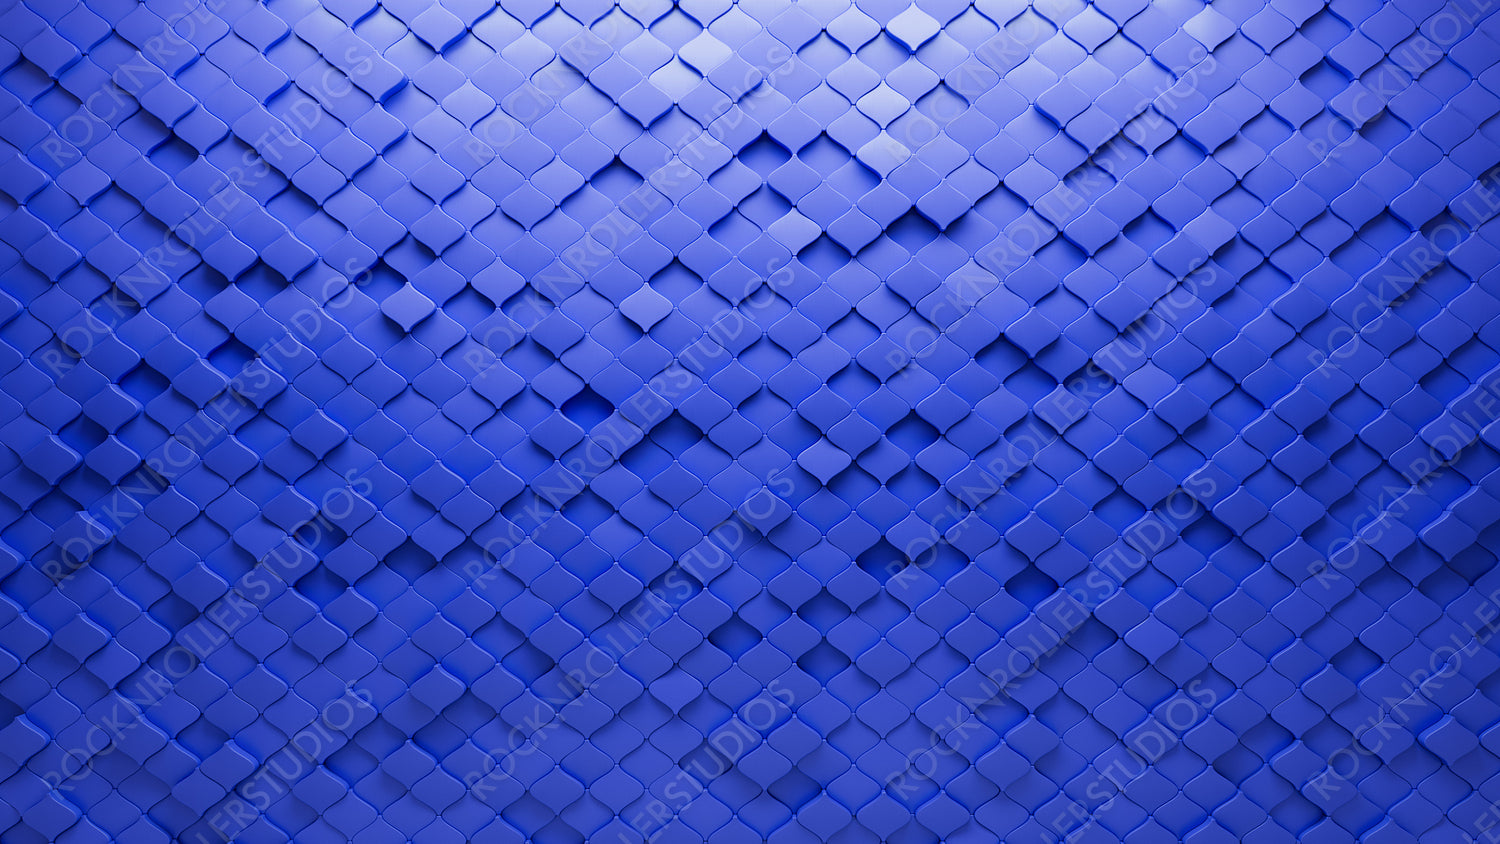 Futuristic, Arabesque Wall background with tiles. 3D, tile Wallpaper with Polished, Blue blocks. 3D Render